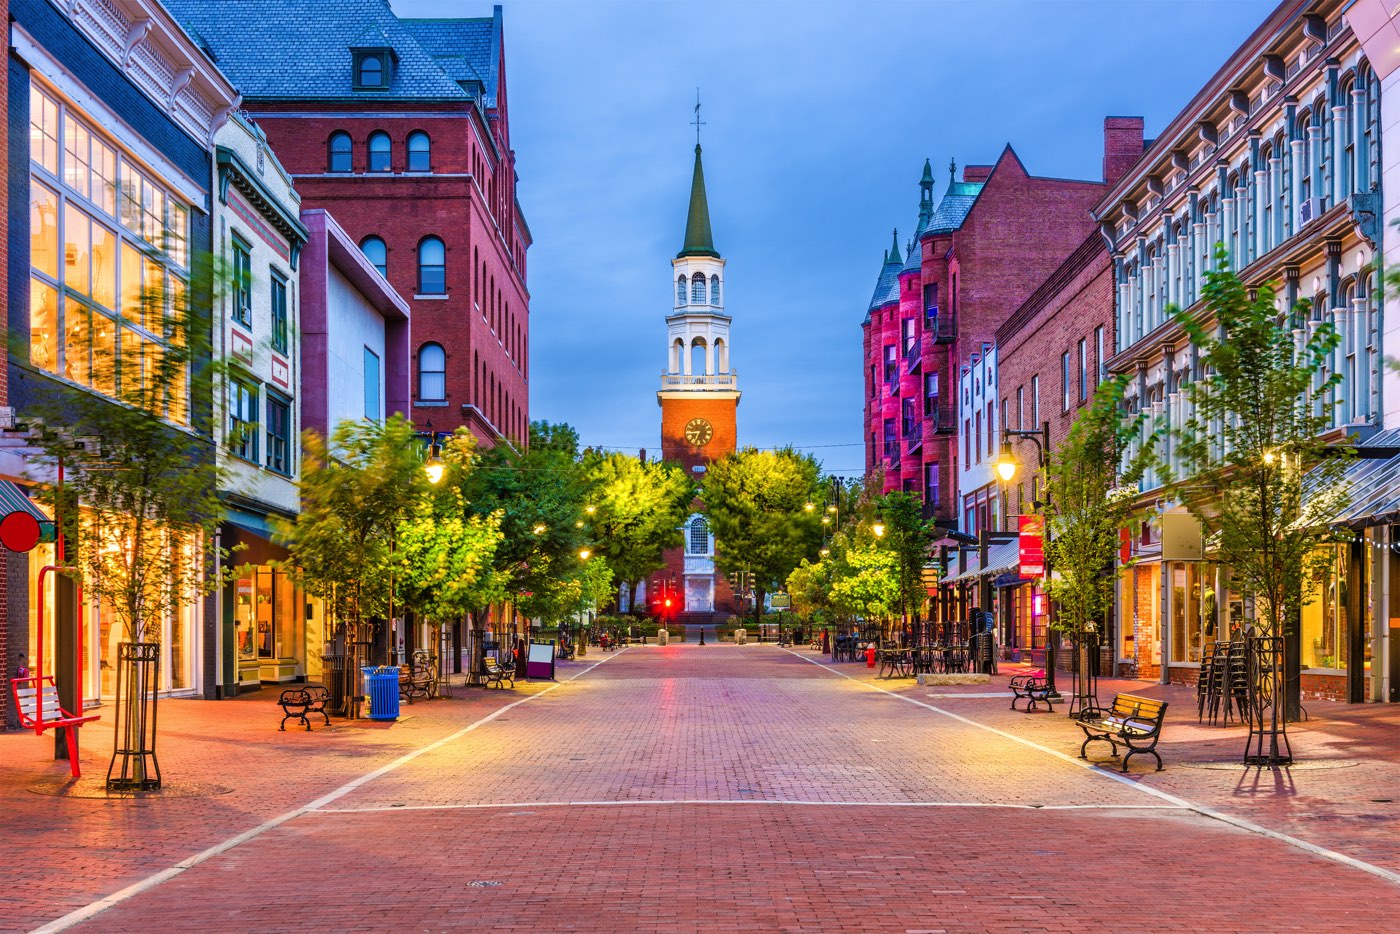 13 THINGS TO DO IN BURLINGTON VT FOR A GUARANTEED GOOD TIME